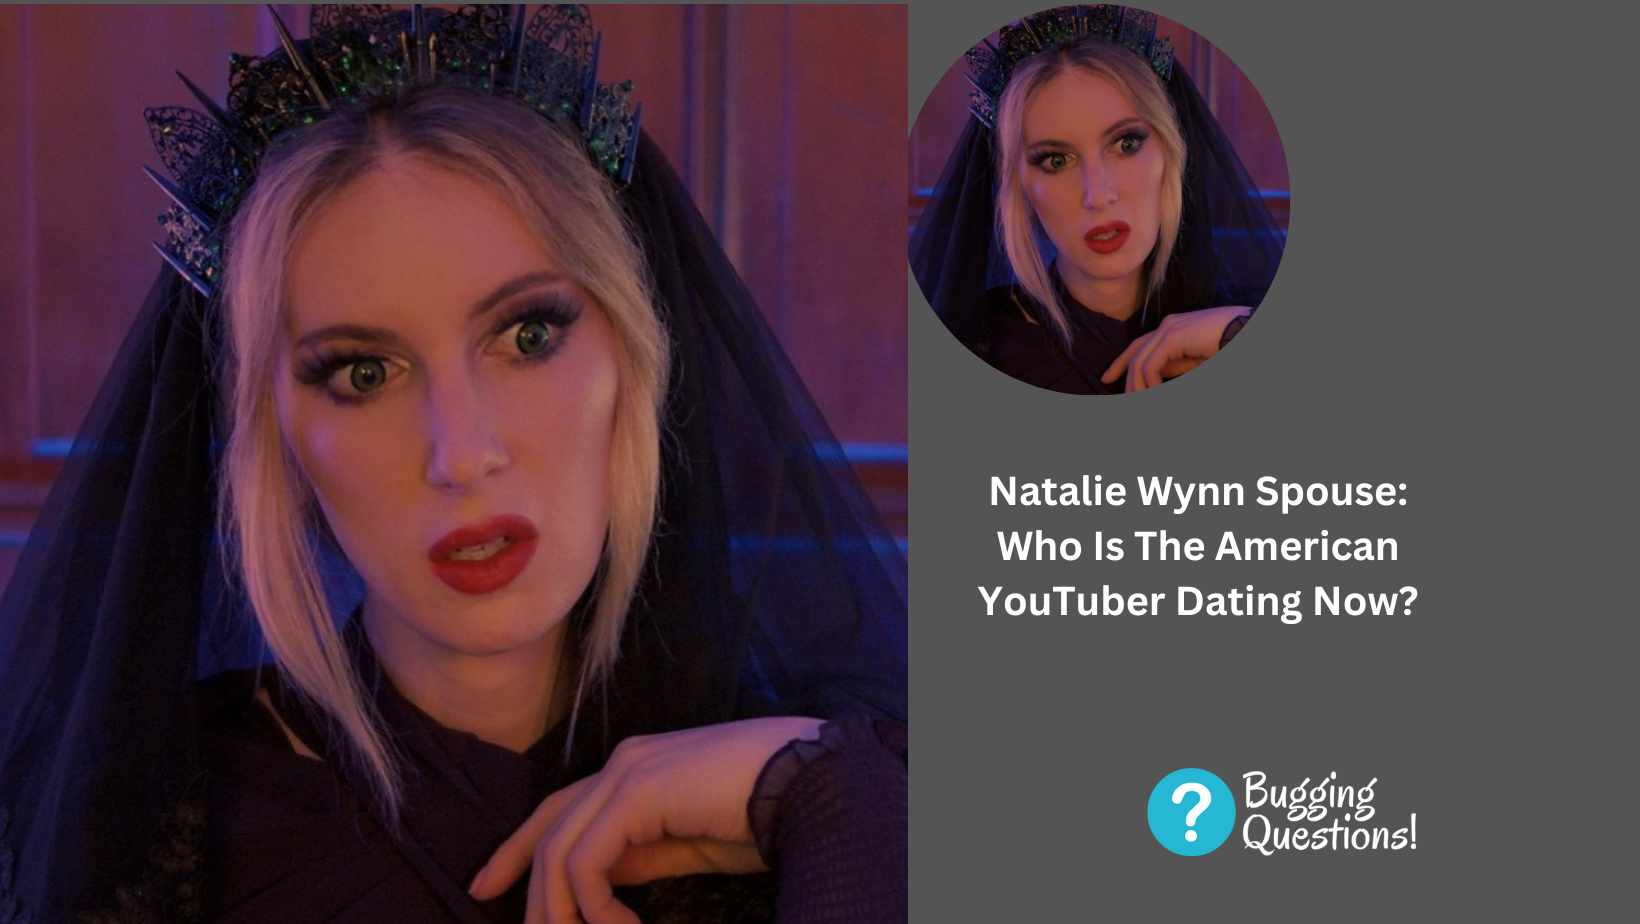 Natalie Wynn Spouse: Who Is The American YouTuber Dating Now?